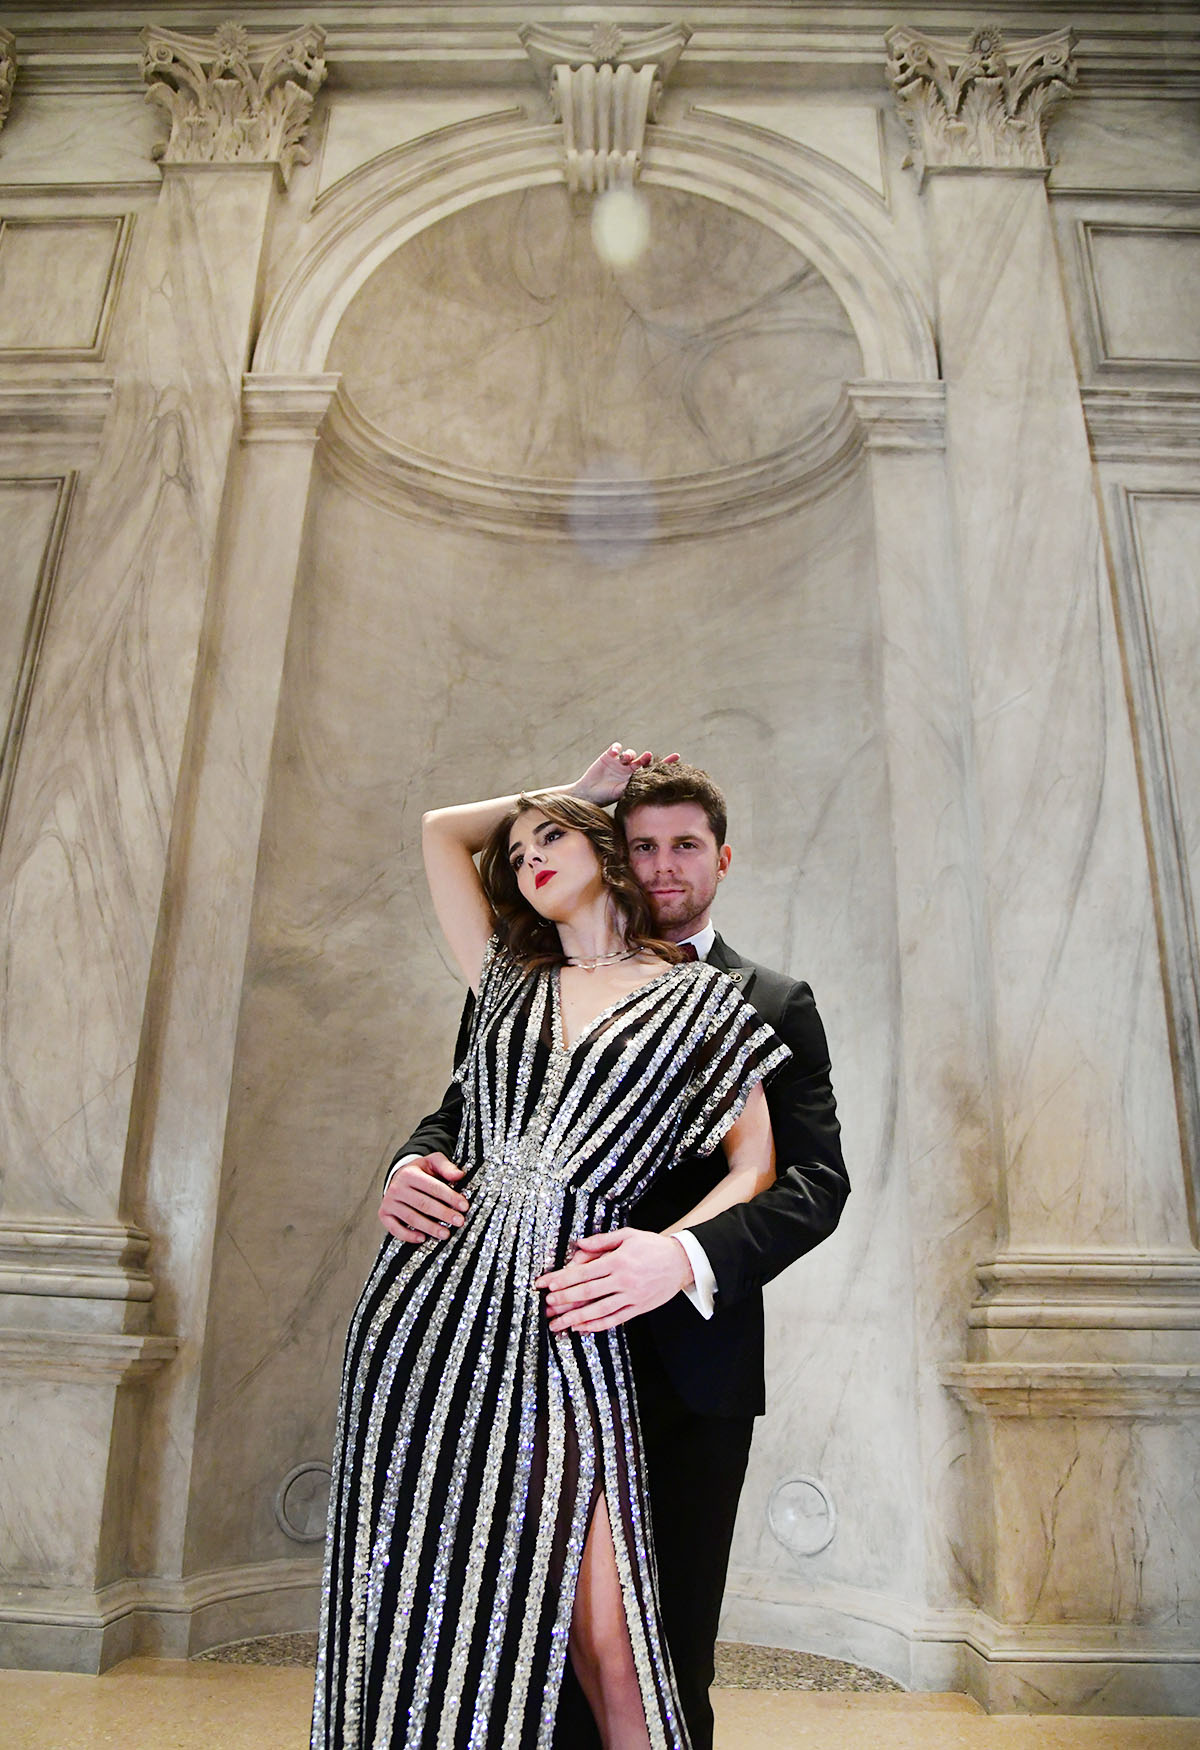 Extravagant editorial: Lovely Love...